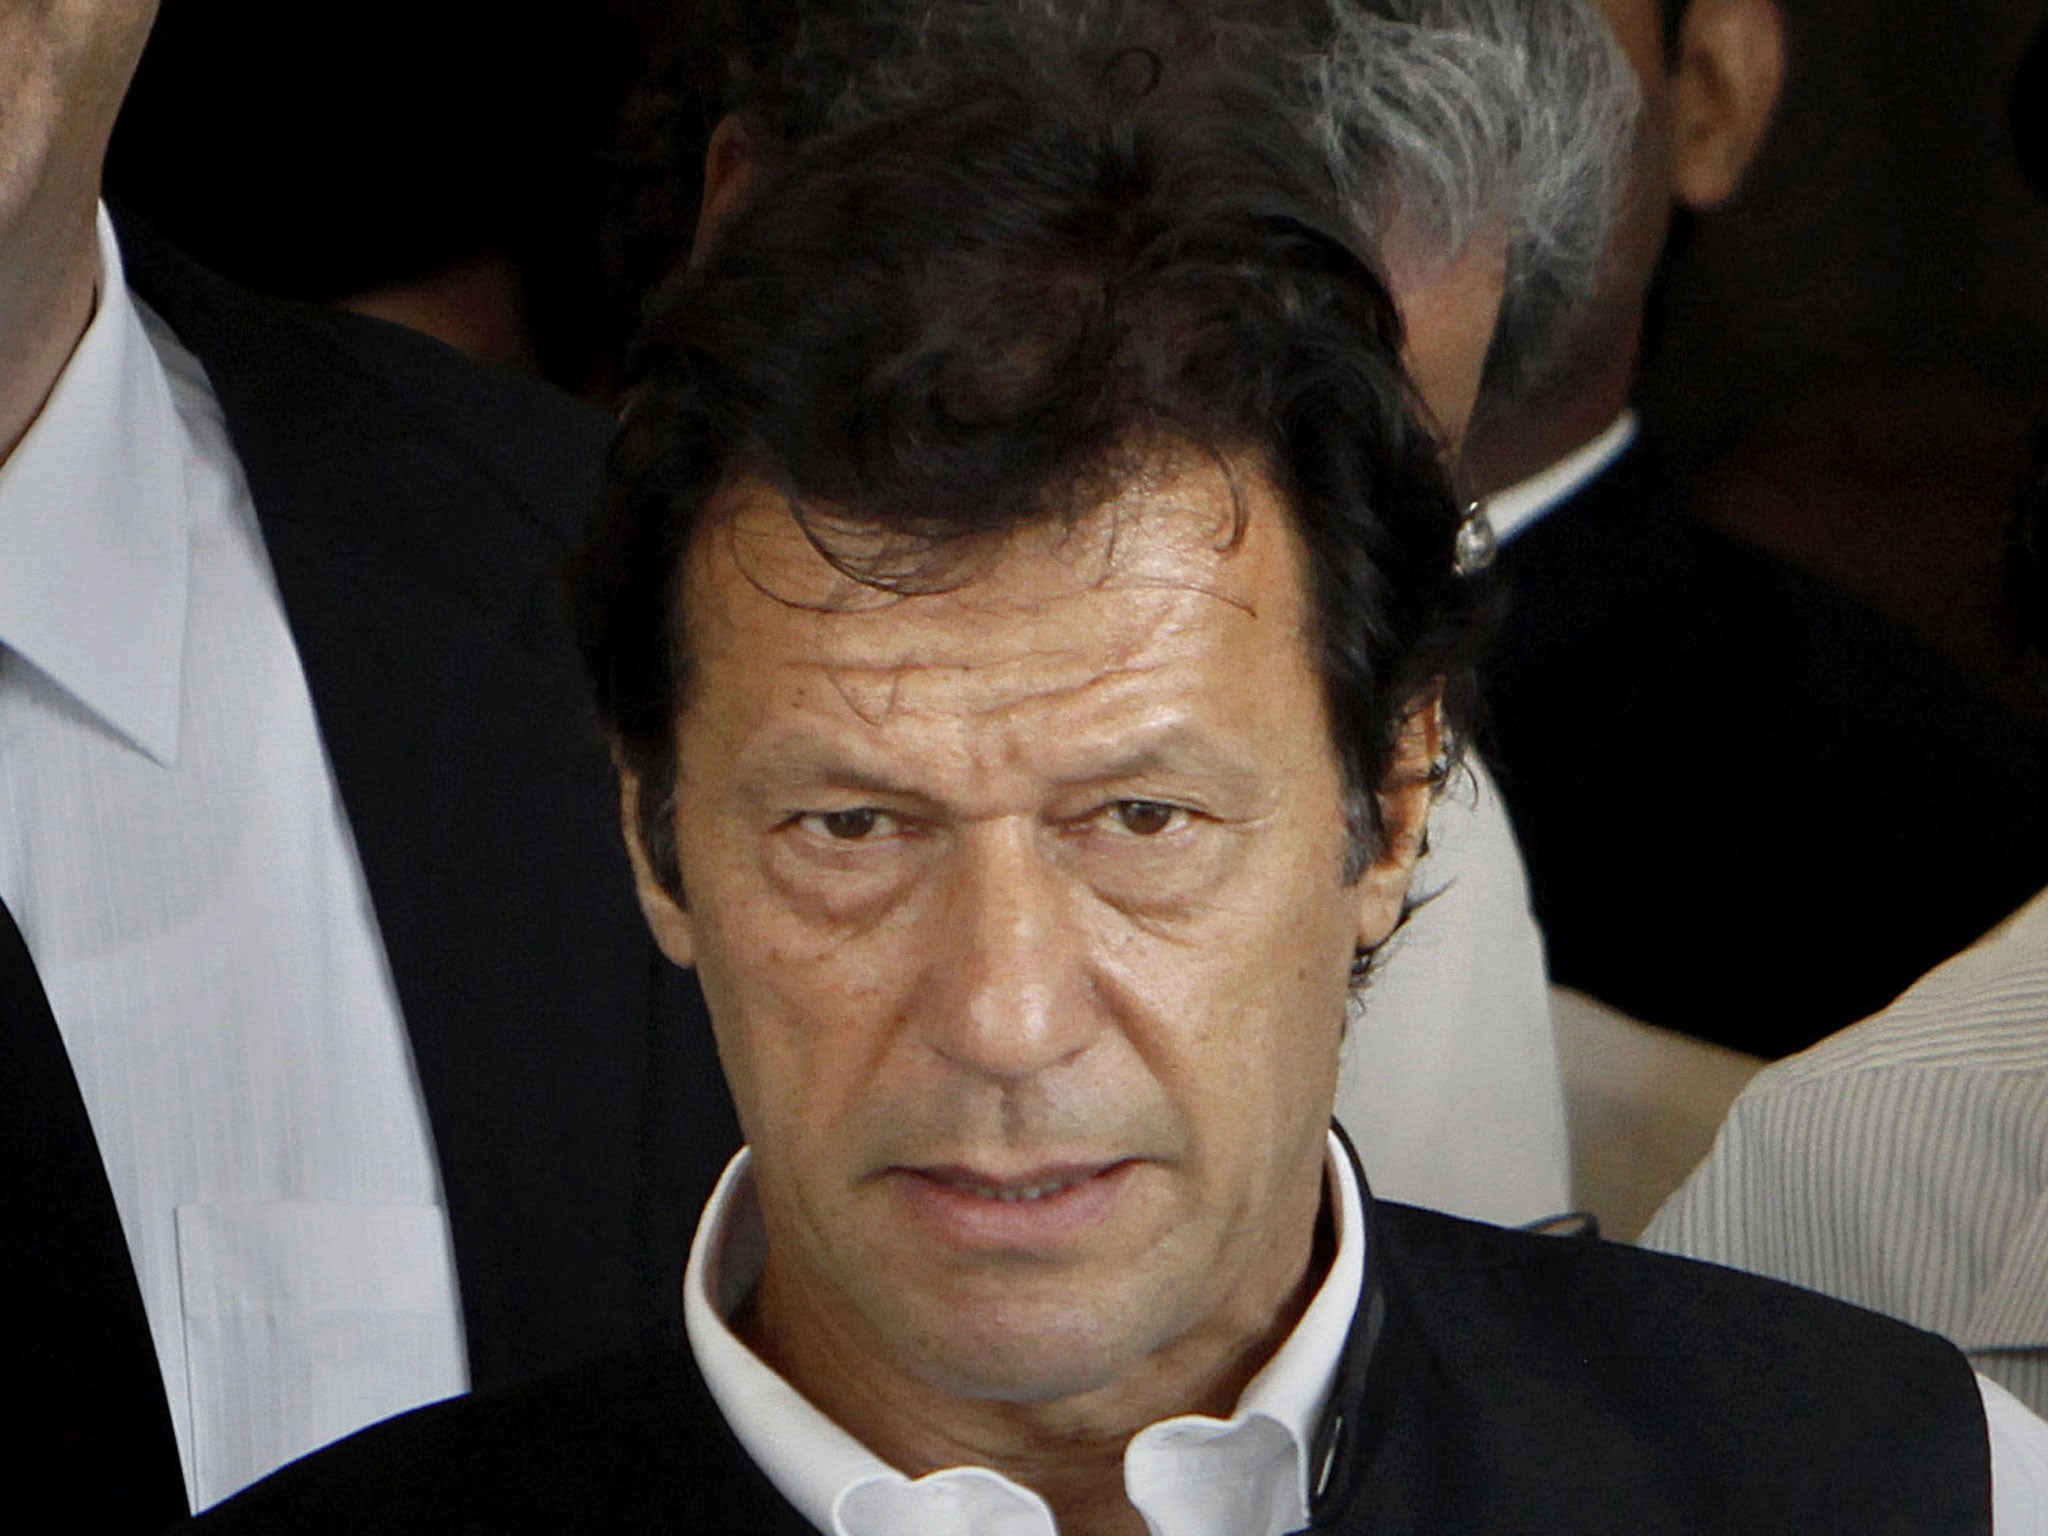 The Pakistani Taliban wants five well-known political and religious figures, including the former cricketer Imran Khan, to represent them in peace talks with the government, according to a statement